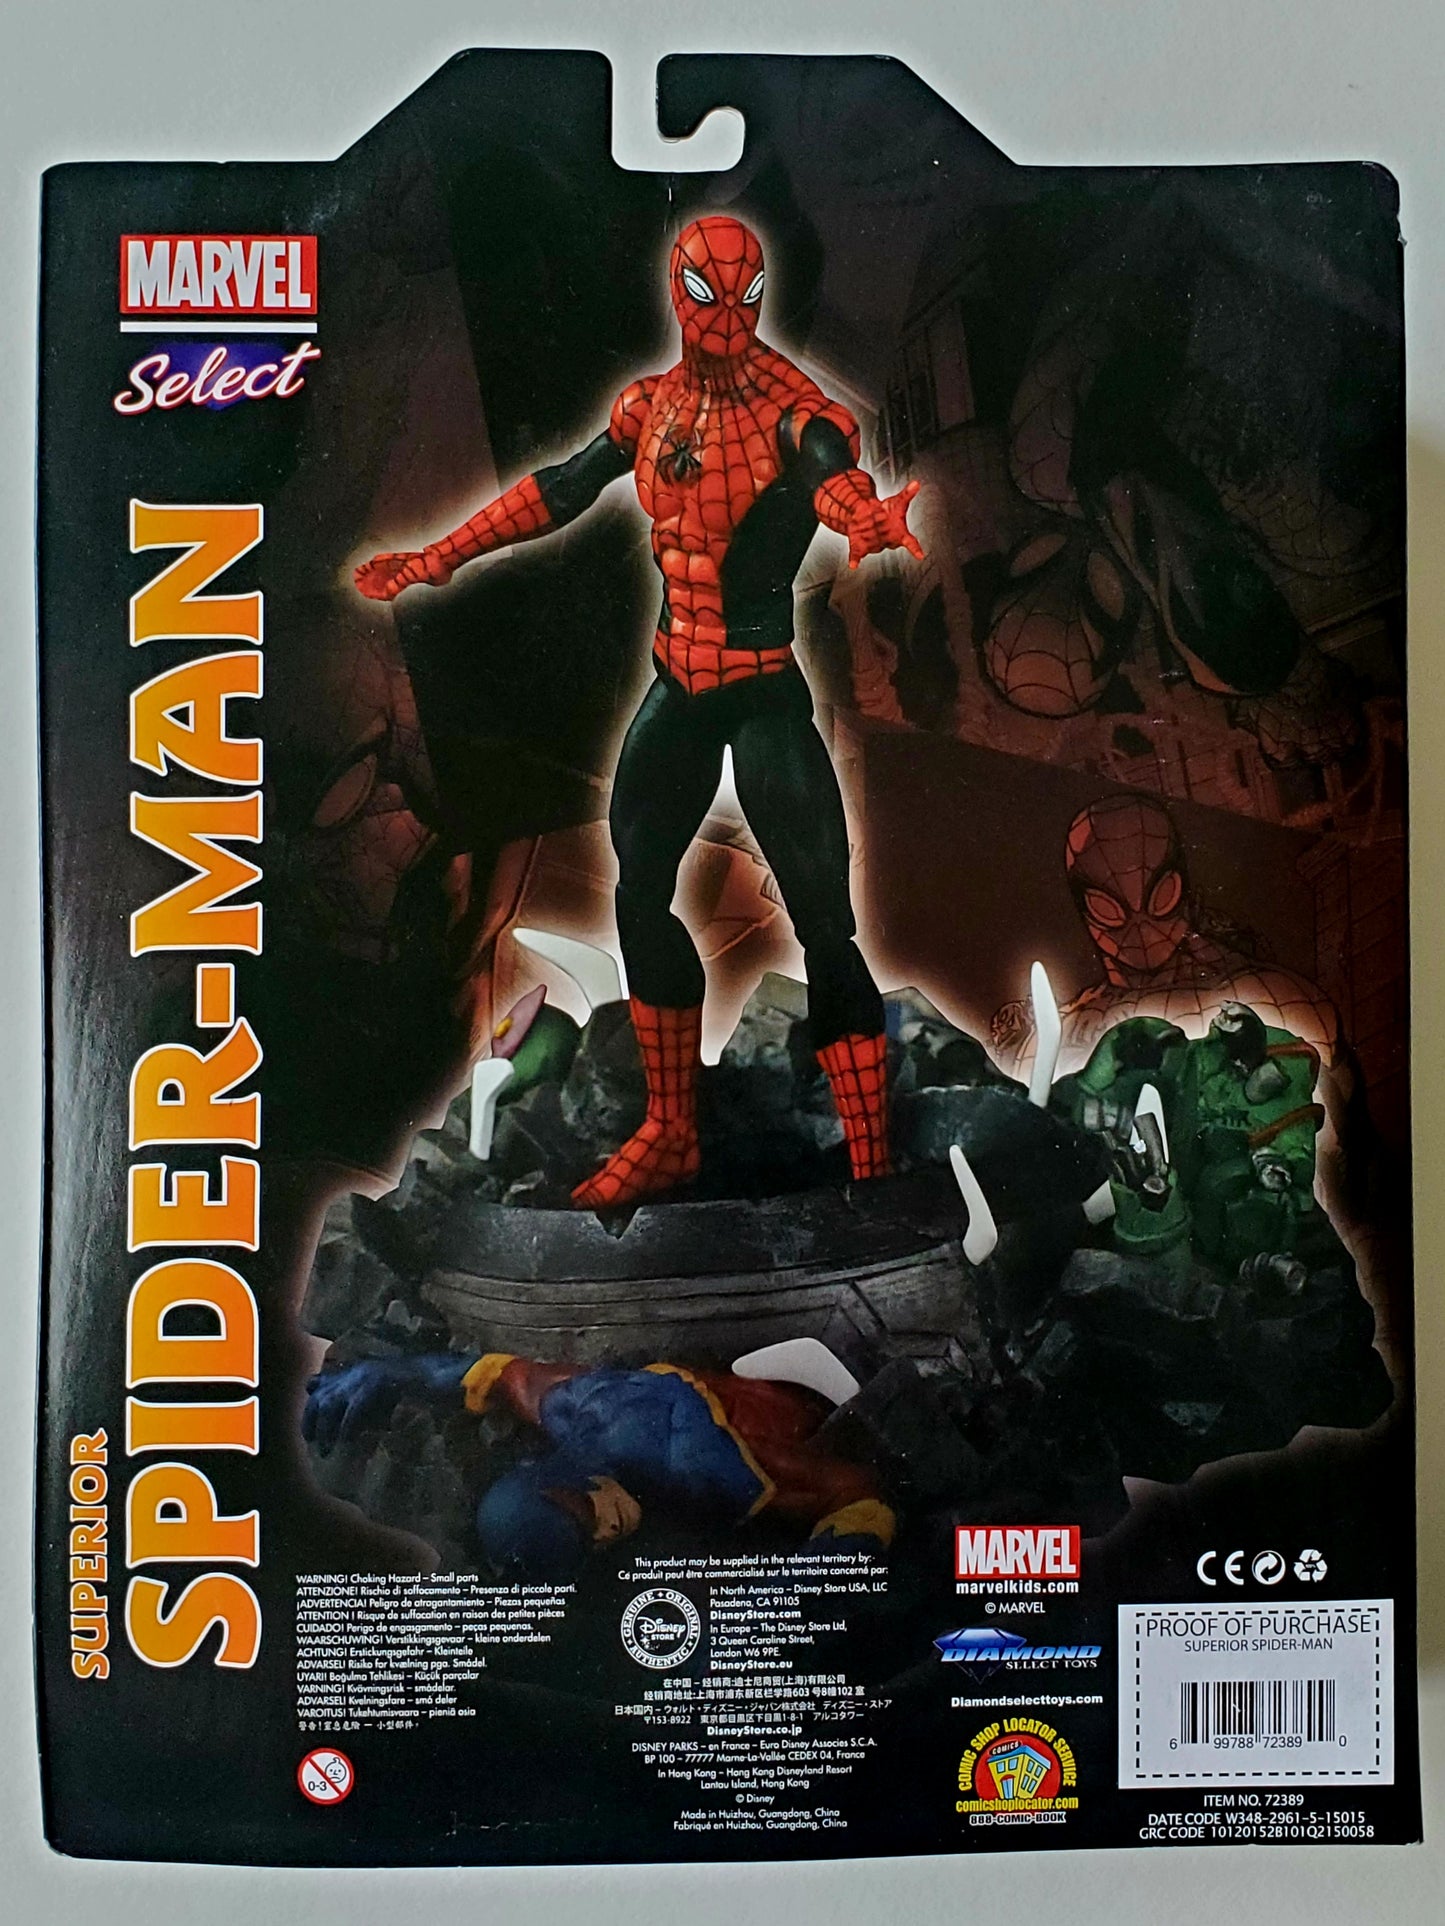 Marvel Select Exclusive Superior Spider-Man Action Figure